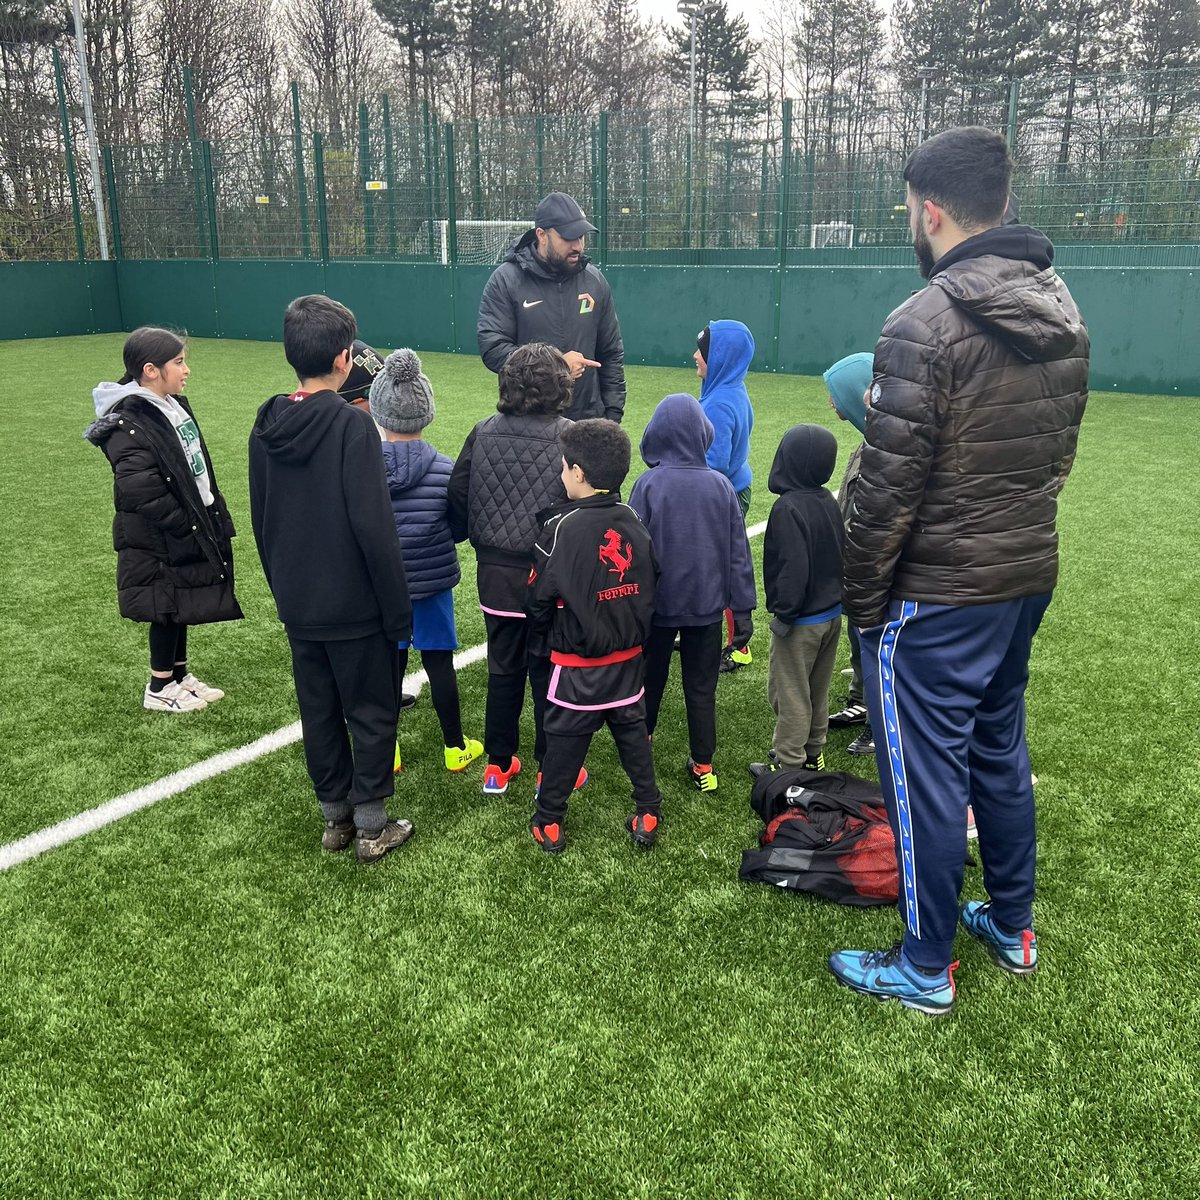 Fantastic turnout @LeisureUnited for our weekly #football session. Developing #football & #social skills, along with #confidence. We pride ourselves in creating a welcoming environment for both #children & parents ❤️